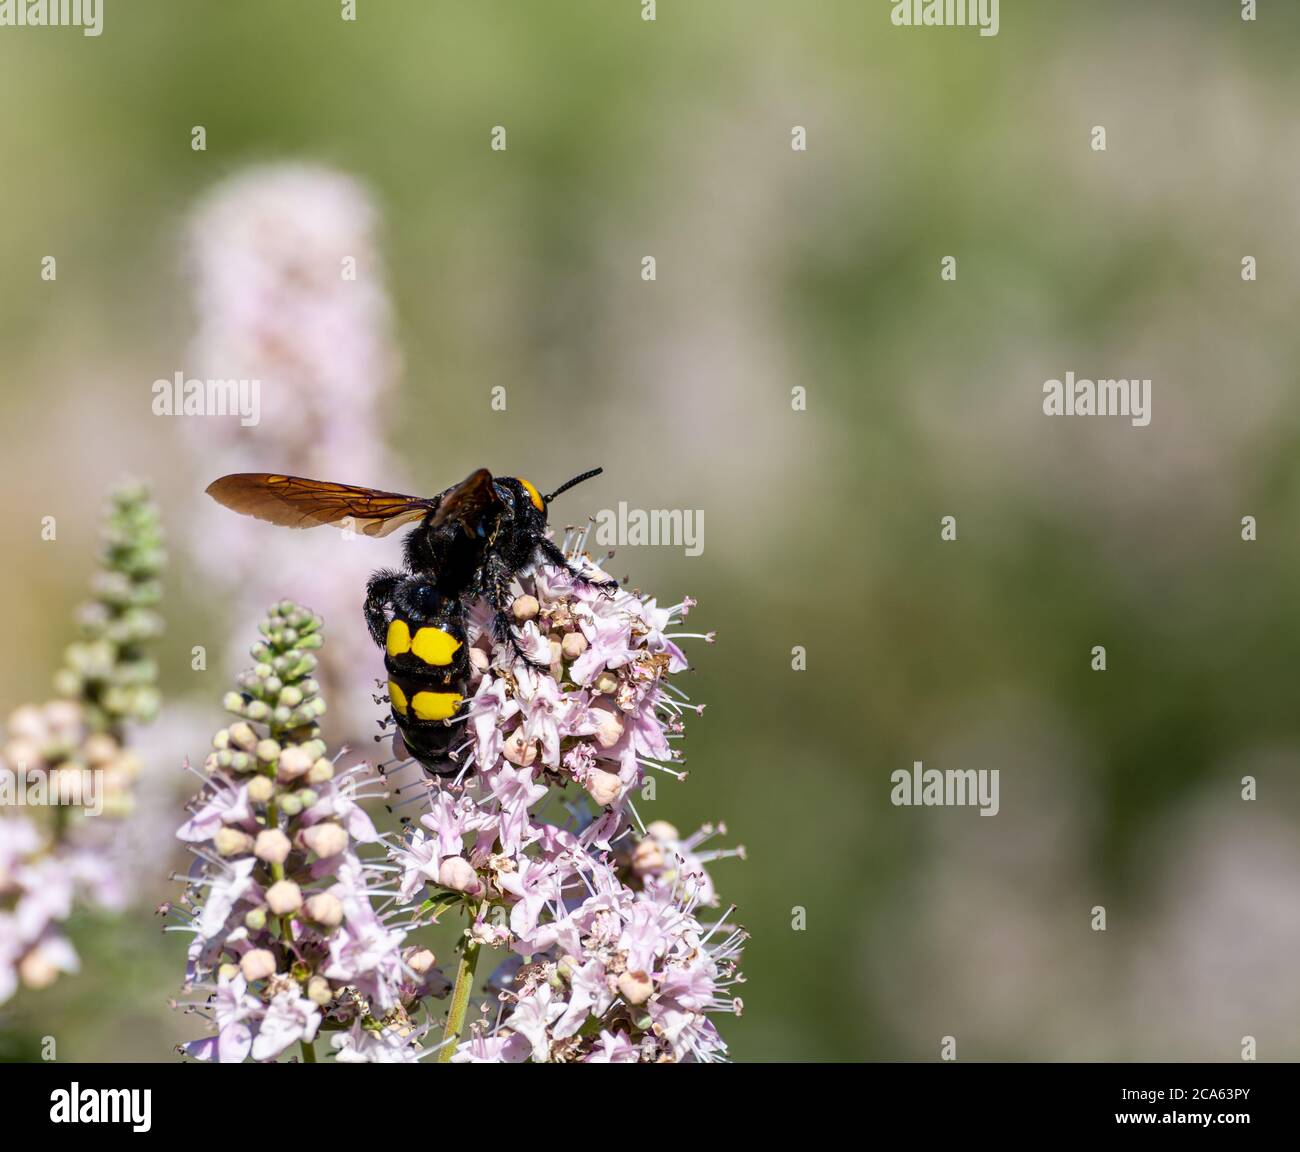 Huge female hornet (Scolia flavifrons), with its characteristic yellow spots, among lavender flowers Stock Photo